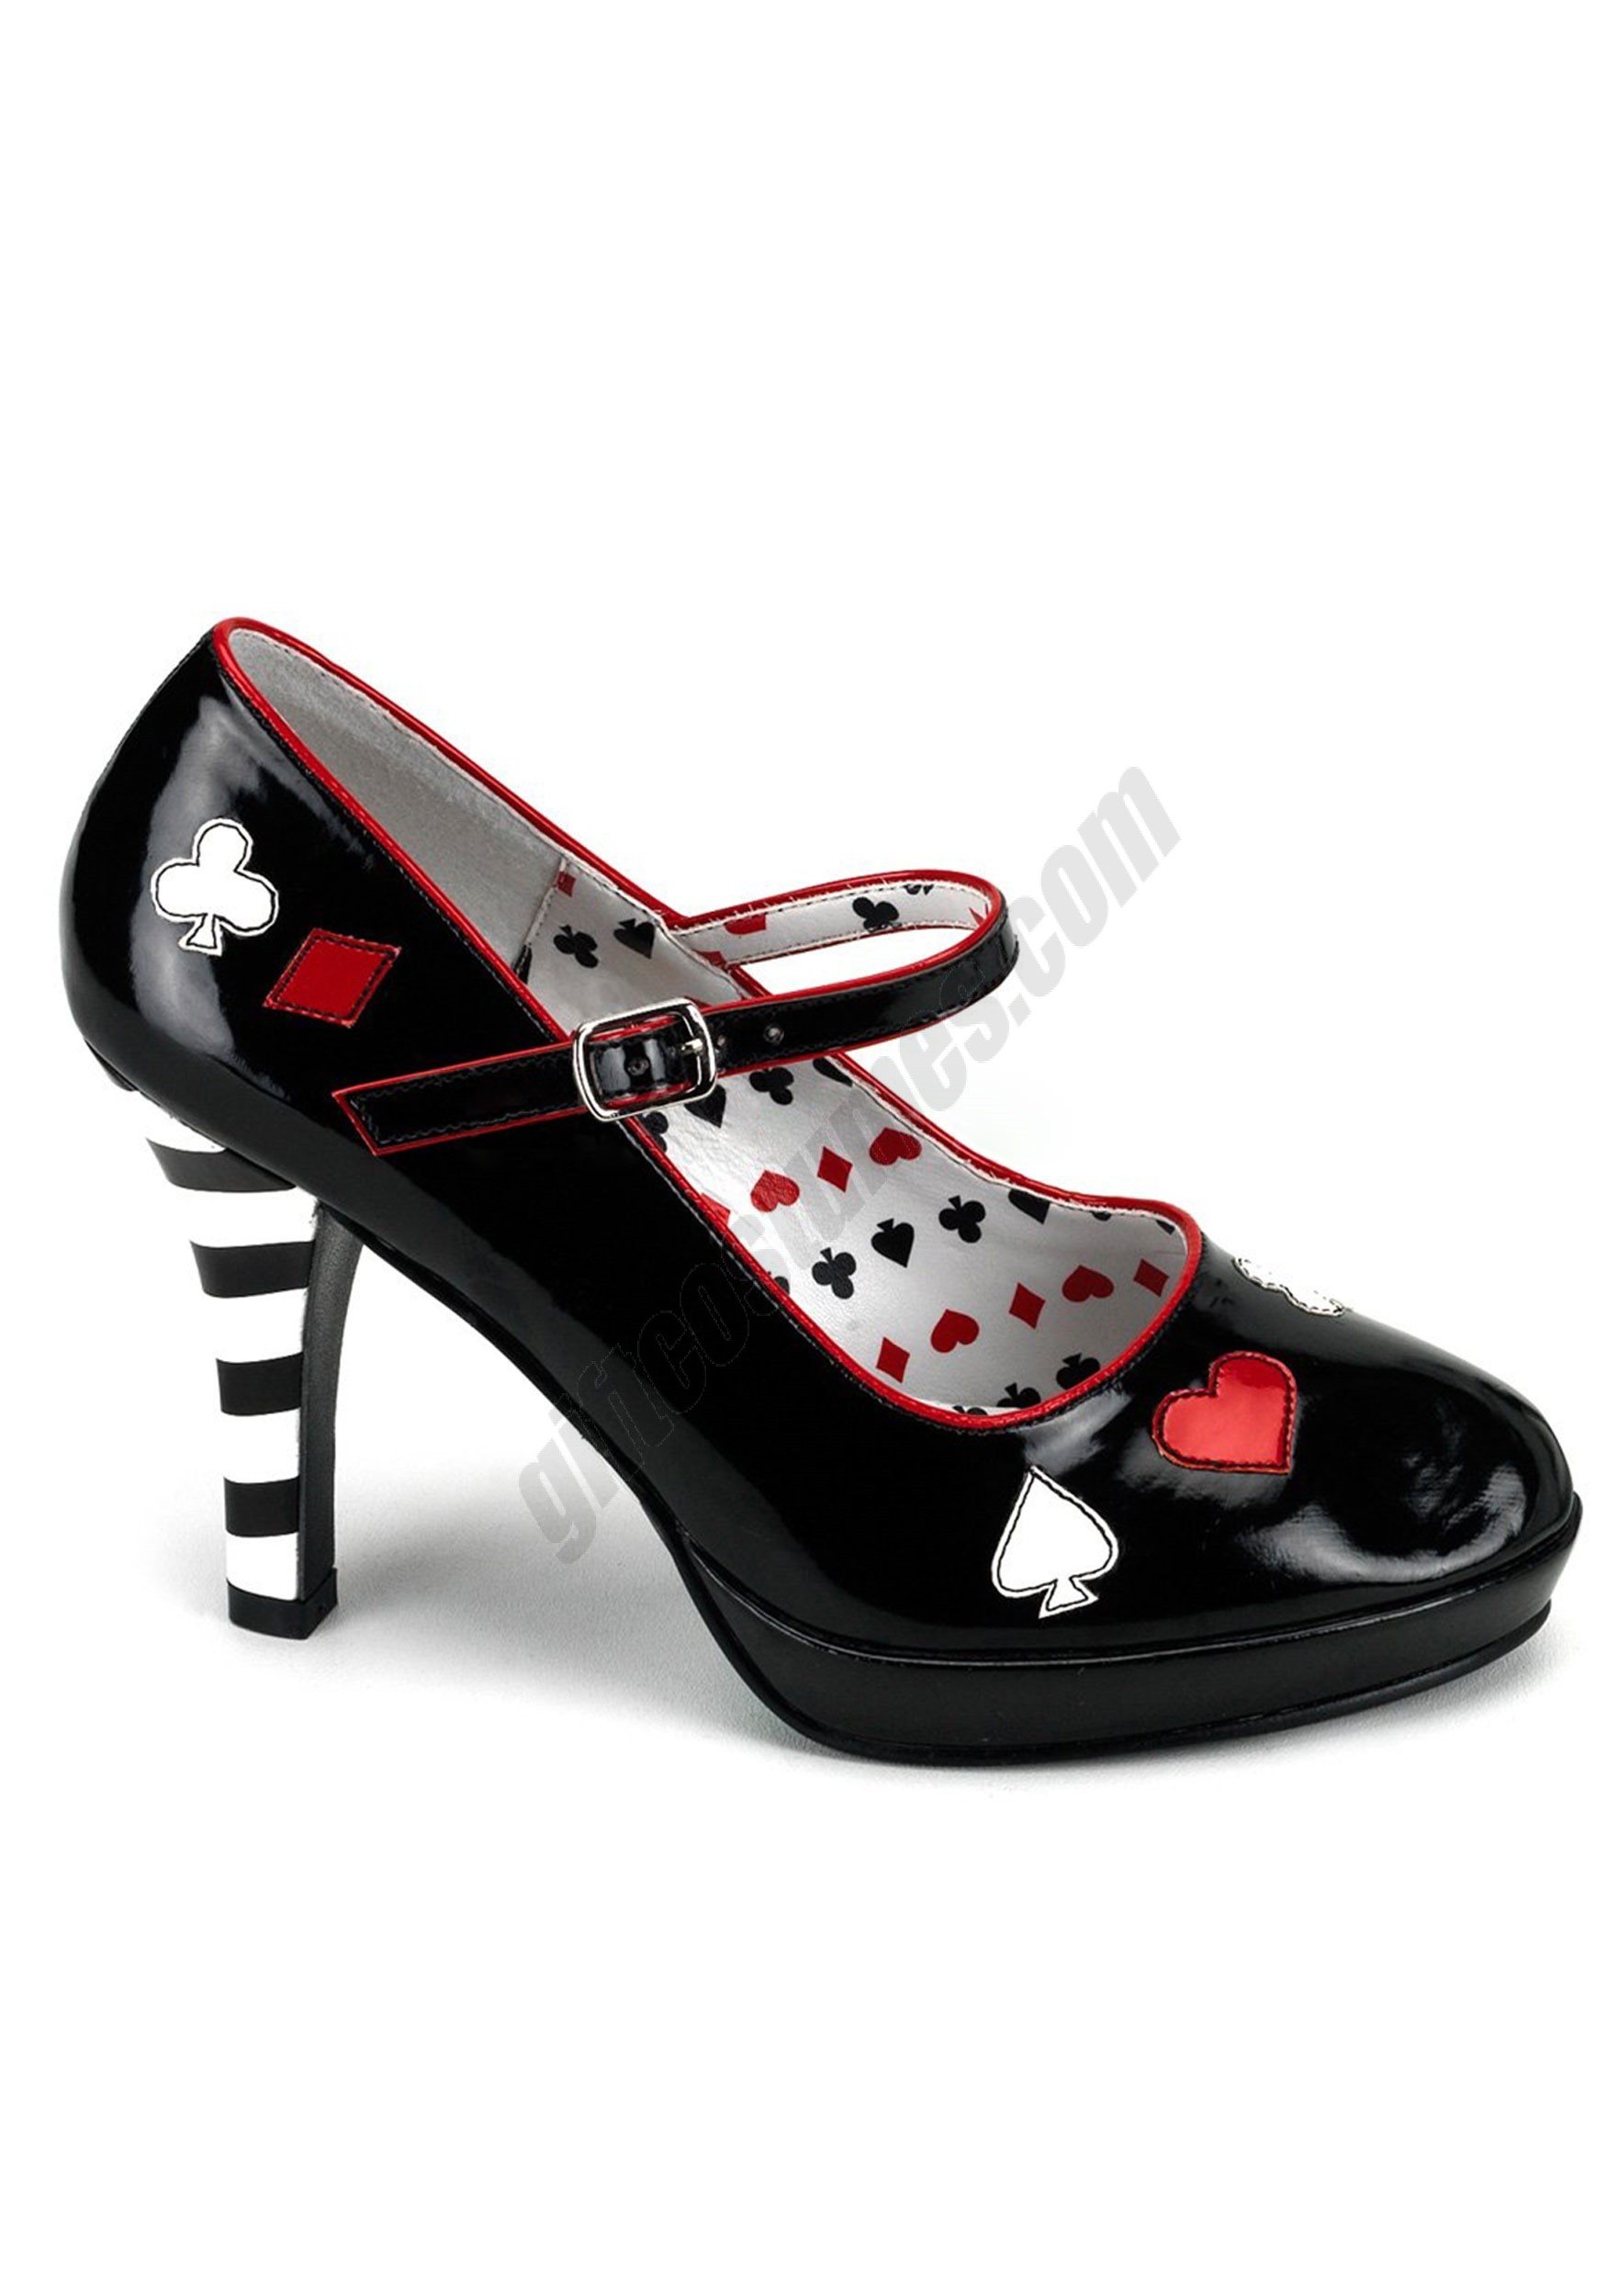 Heart Queen Shoes for Women Promotions - Heart Queen Shoes for Women Promotions